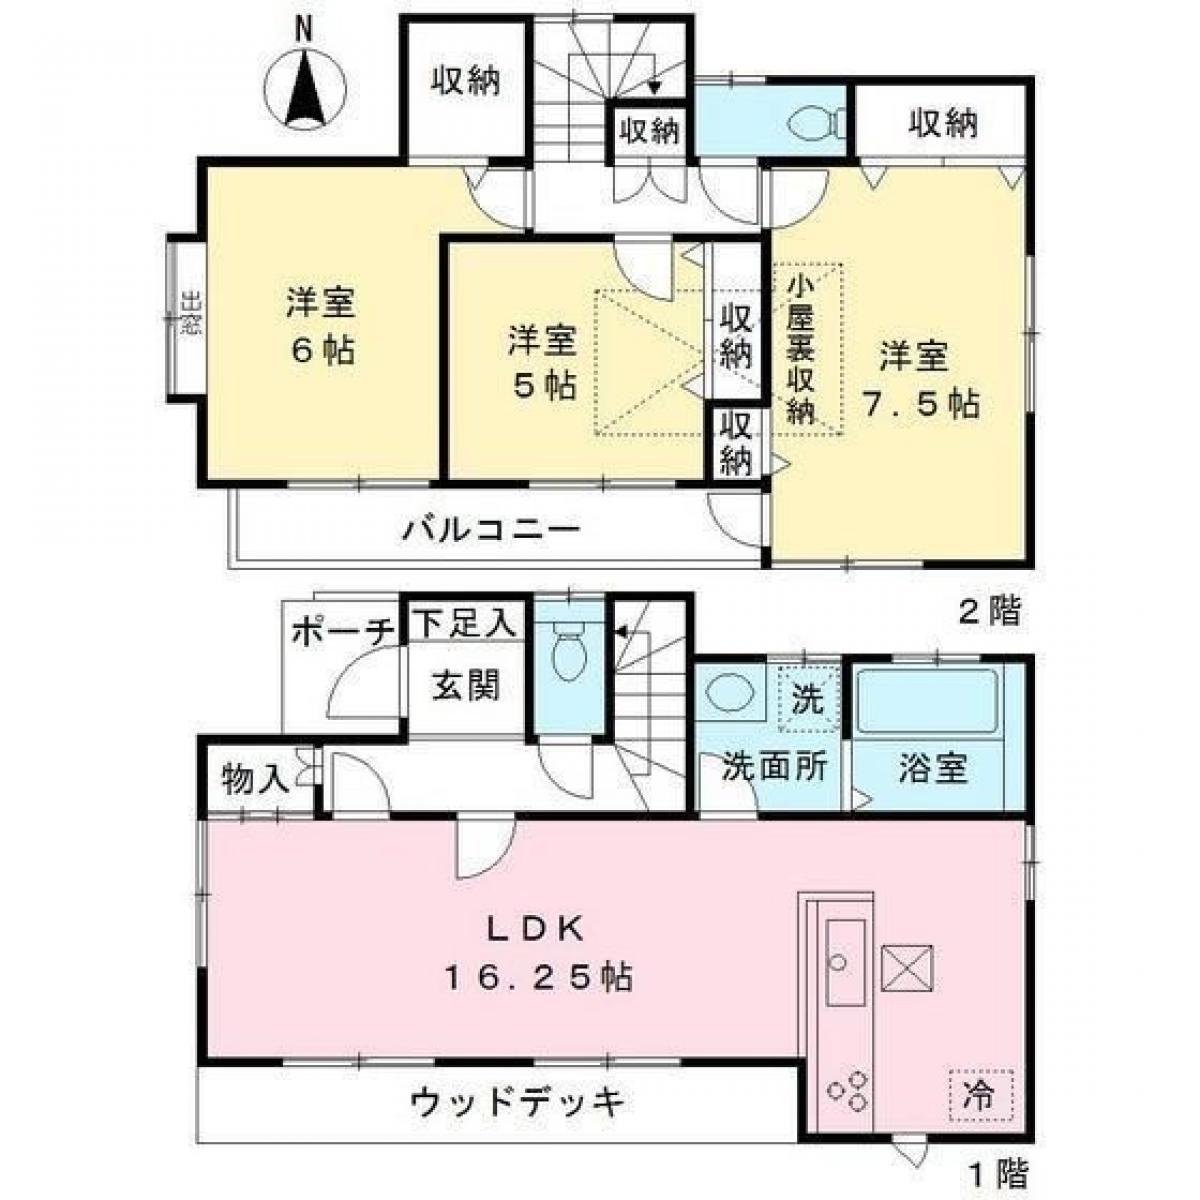 Picture of Home For Sale in Tama Shi, Tokyo, Japan